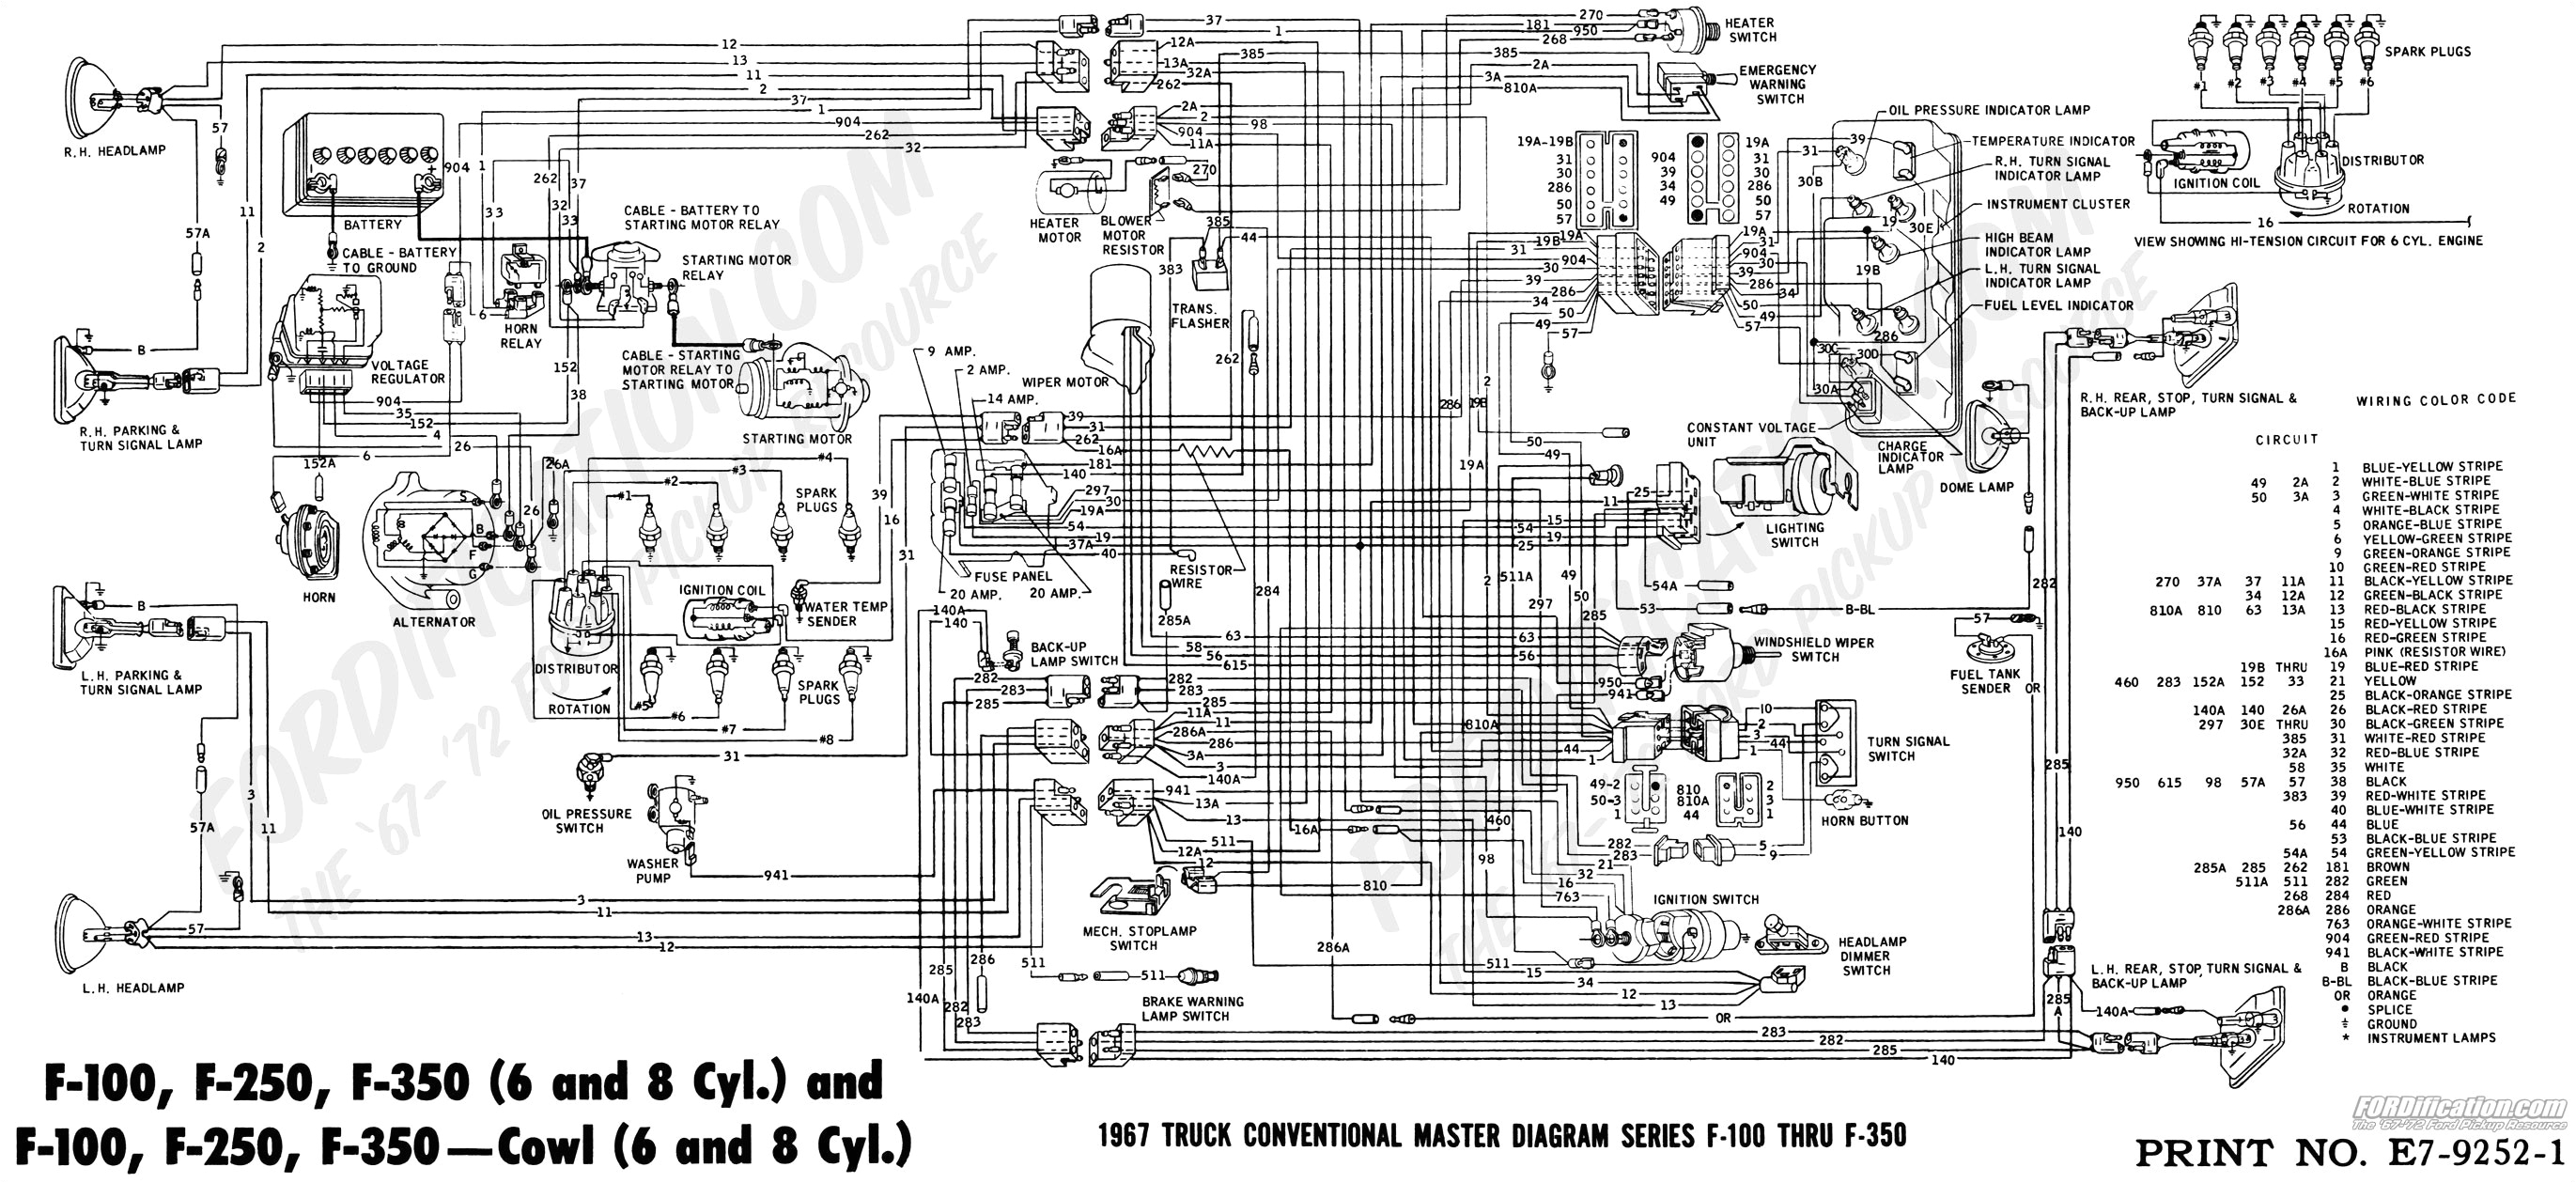 diagram for 94 ford f 150 wiper wiring harness on system wiring 86 f150 wiper wiring diagram